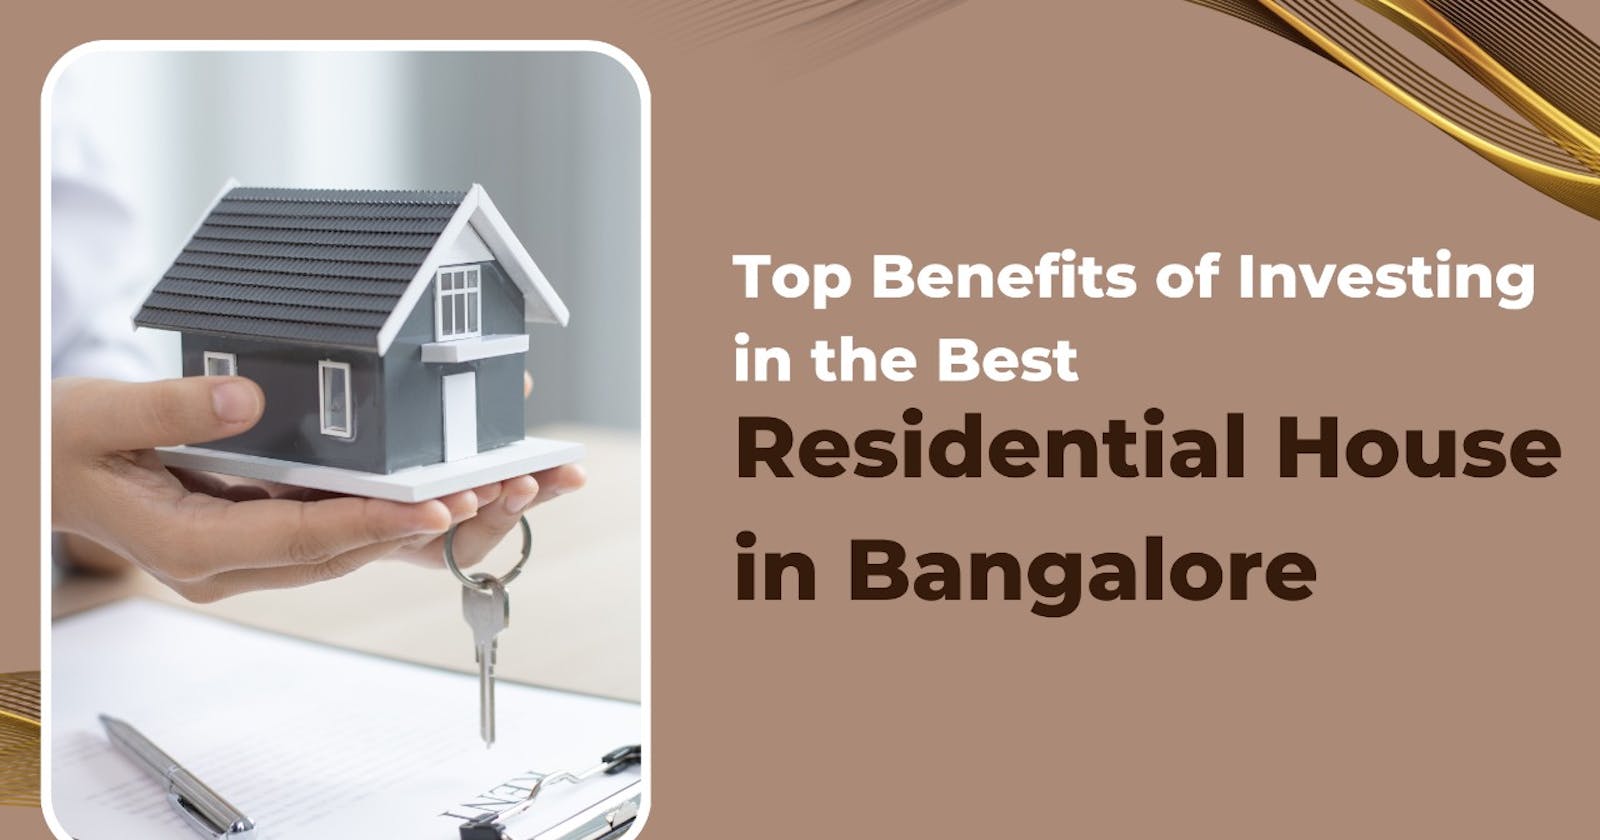 Top Benefits of Investing in the Best Residential House in Bangalore